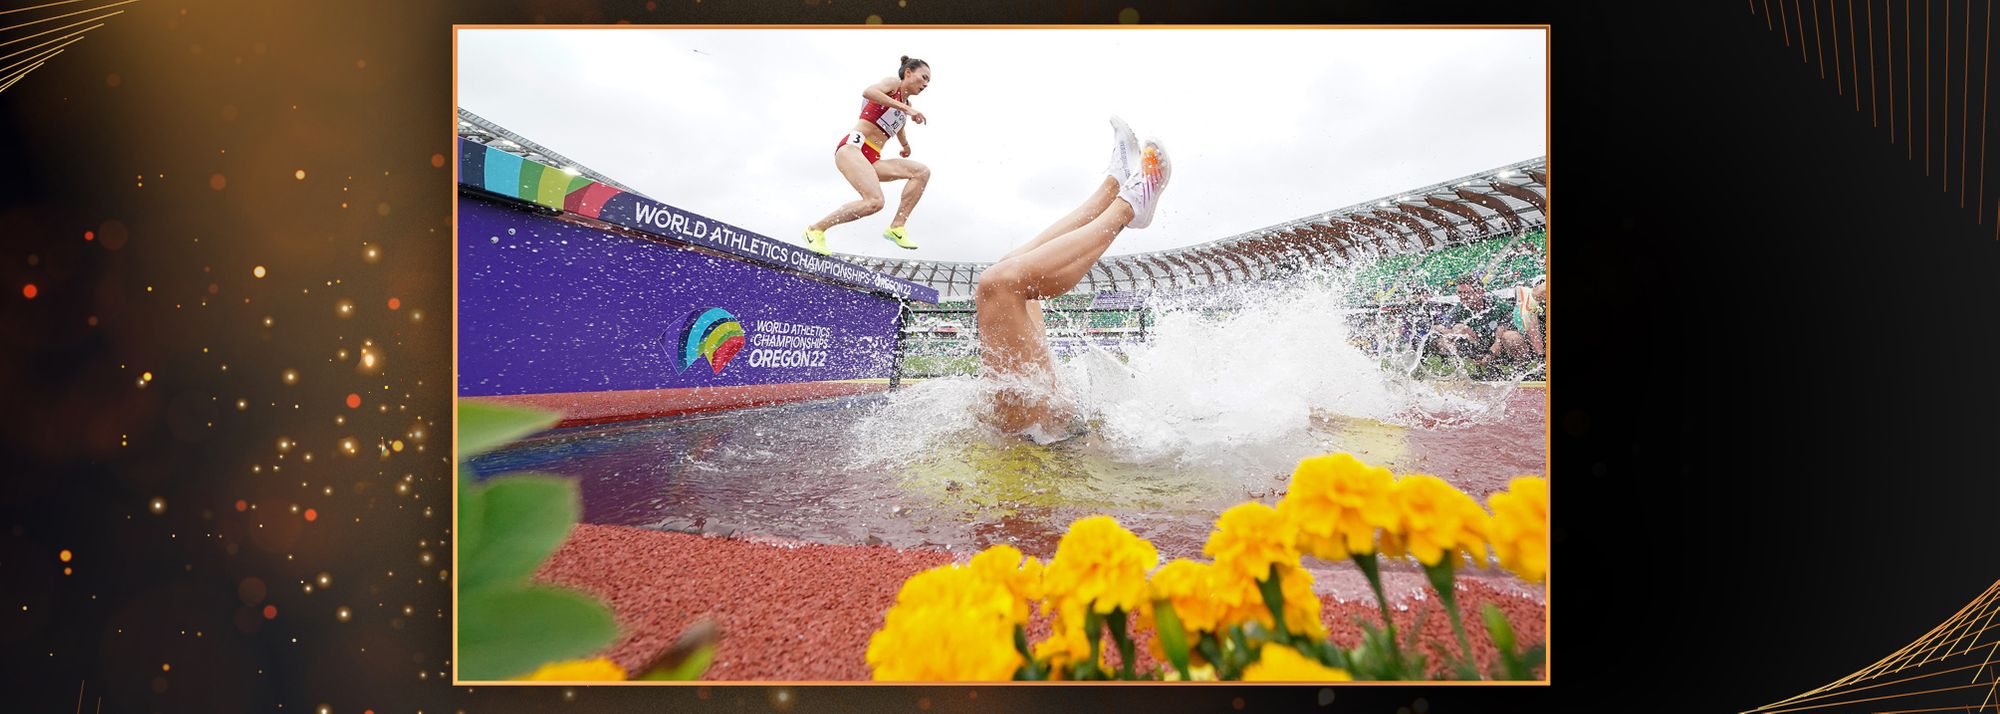 Martin Rickett’s shot of a fall at the water jump during the steeplechase at the World Athletics Championships Oregon22 has been selected as the World Athletics Photograph of the Year